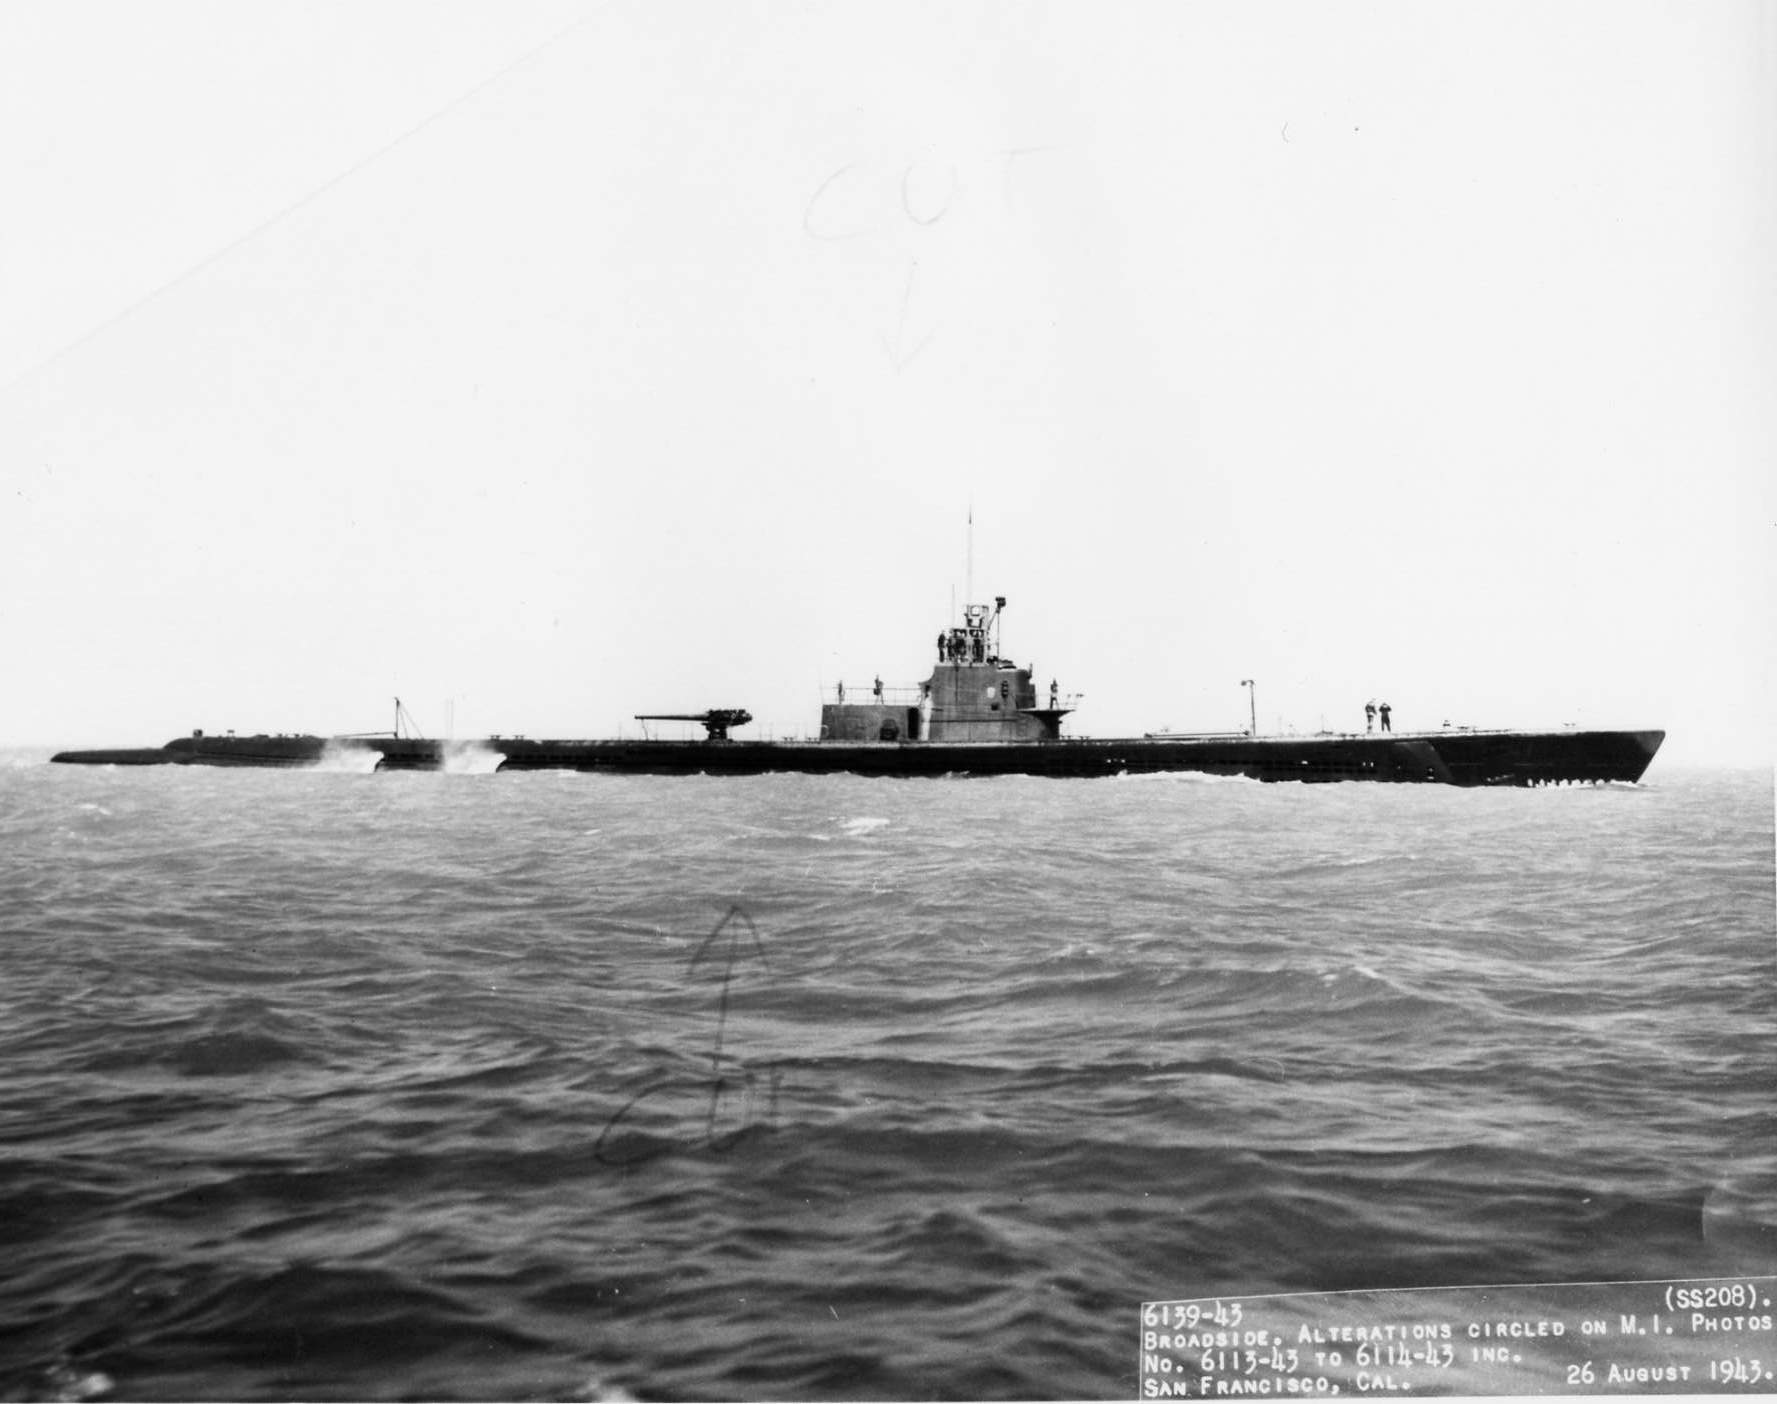 Starboard side view of USS Grayback off Hunter's Point, San Francisco, California, United States, 26 Aug 1943, photo 1 of 2